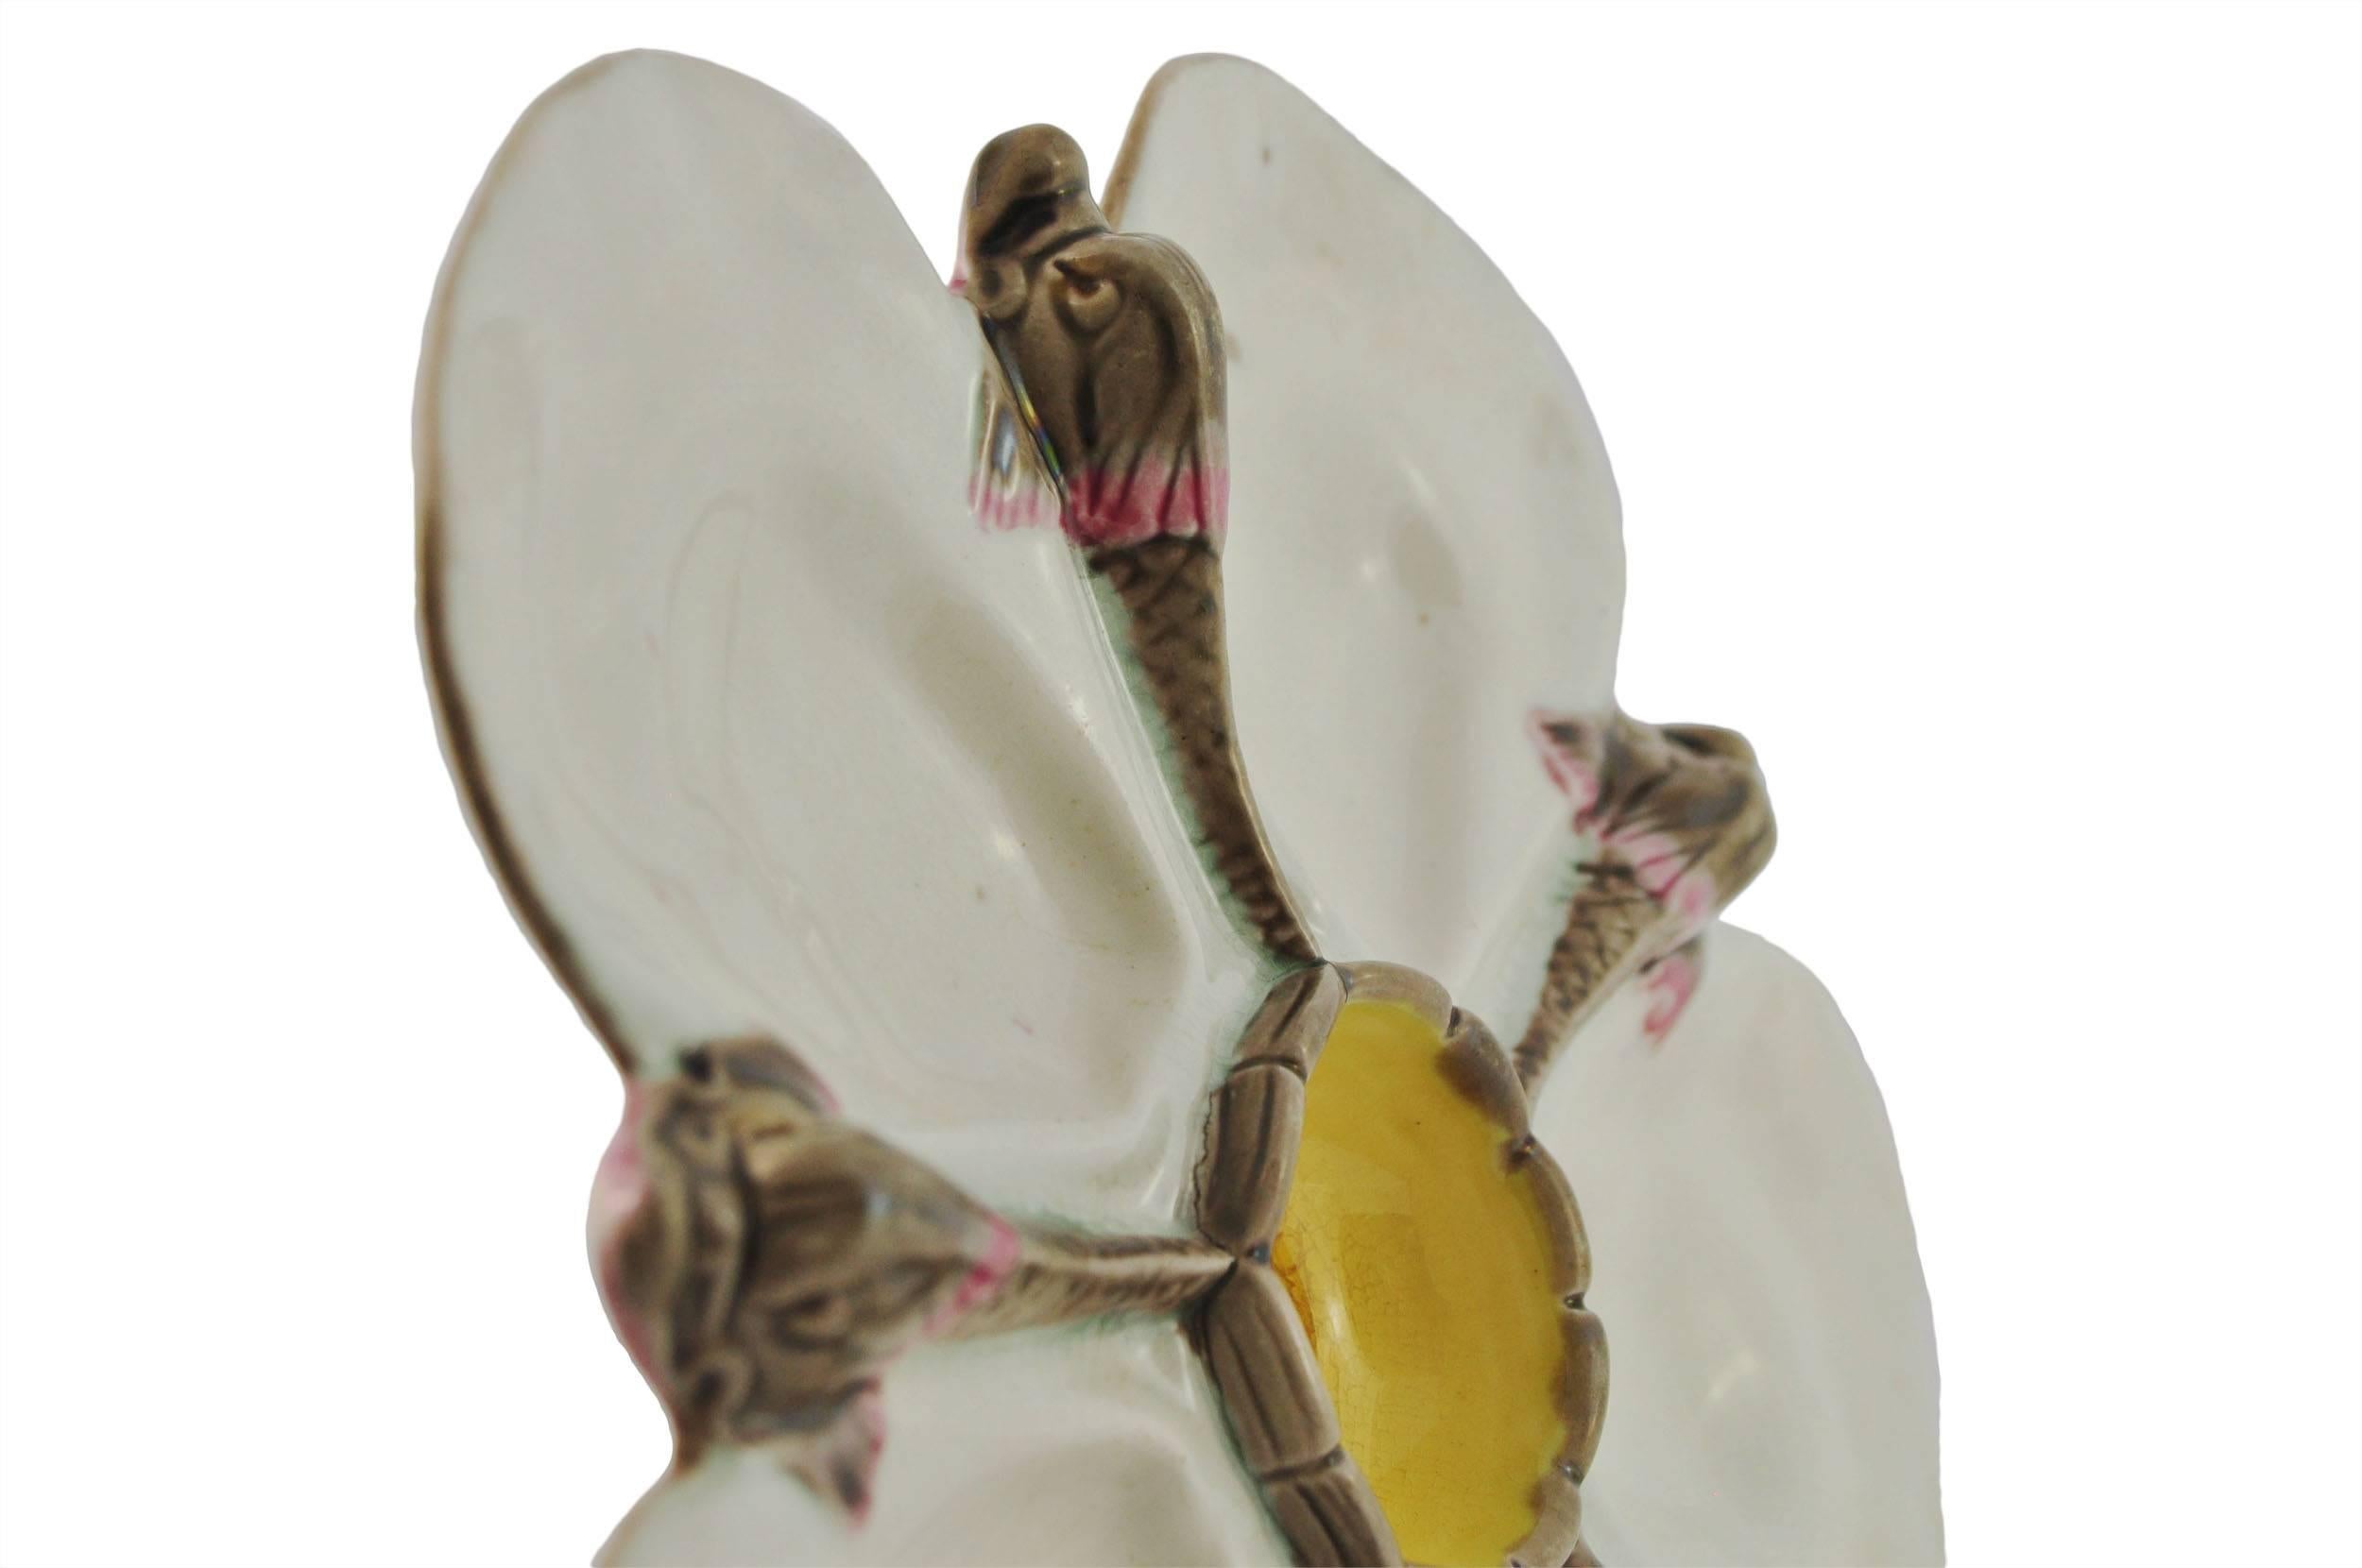 Pair Rare Wedgwood Majolica argenta ware oyster plates, each naturalistically molded with a central well glazed in yellow within five oyster shell-form pockets separated by dolphins glazed in shades of gray and pink, impressed Wedgwood, with date